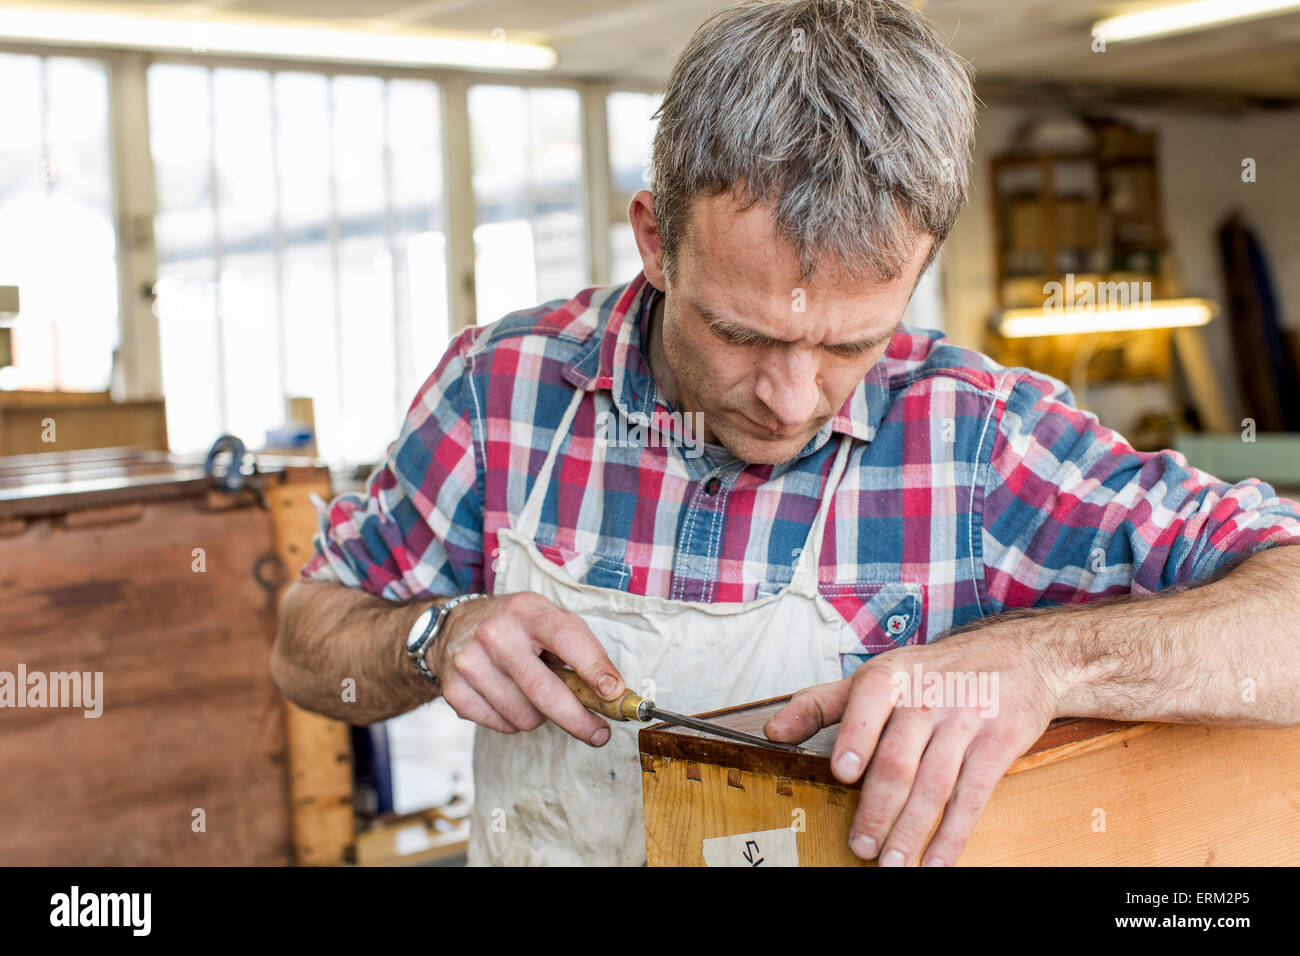 A man in a furniture restoration workshop using a hand tool on a piece of antique furniture. Stock Photo